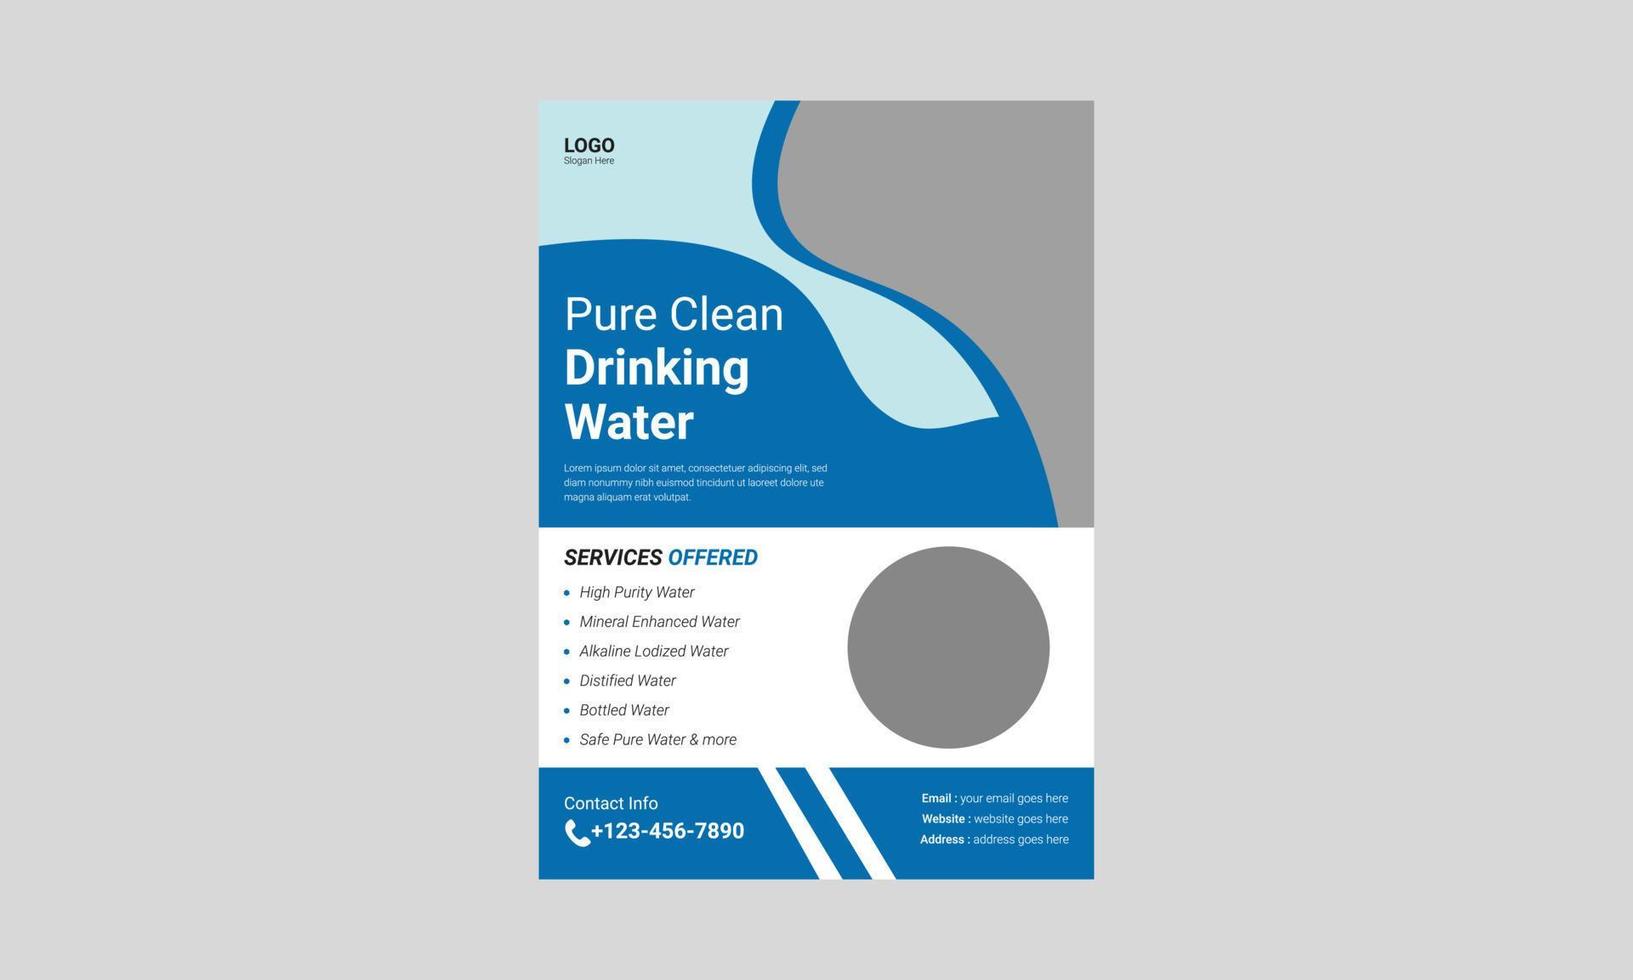 Water refilling service flyer design. Drink pure water poster template. Freshwater service flyer template, cover, a4 size, flyer, poster, leaflet, print-ready vector